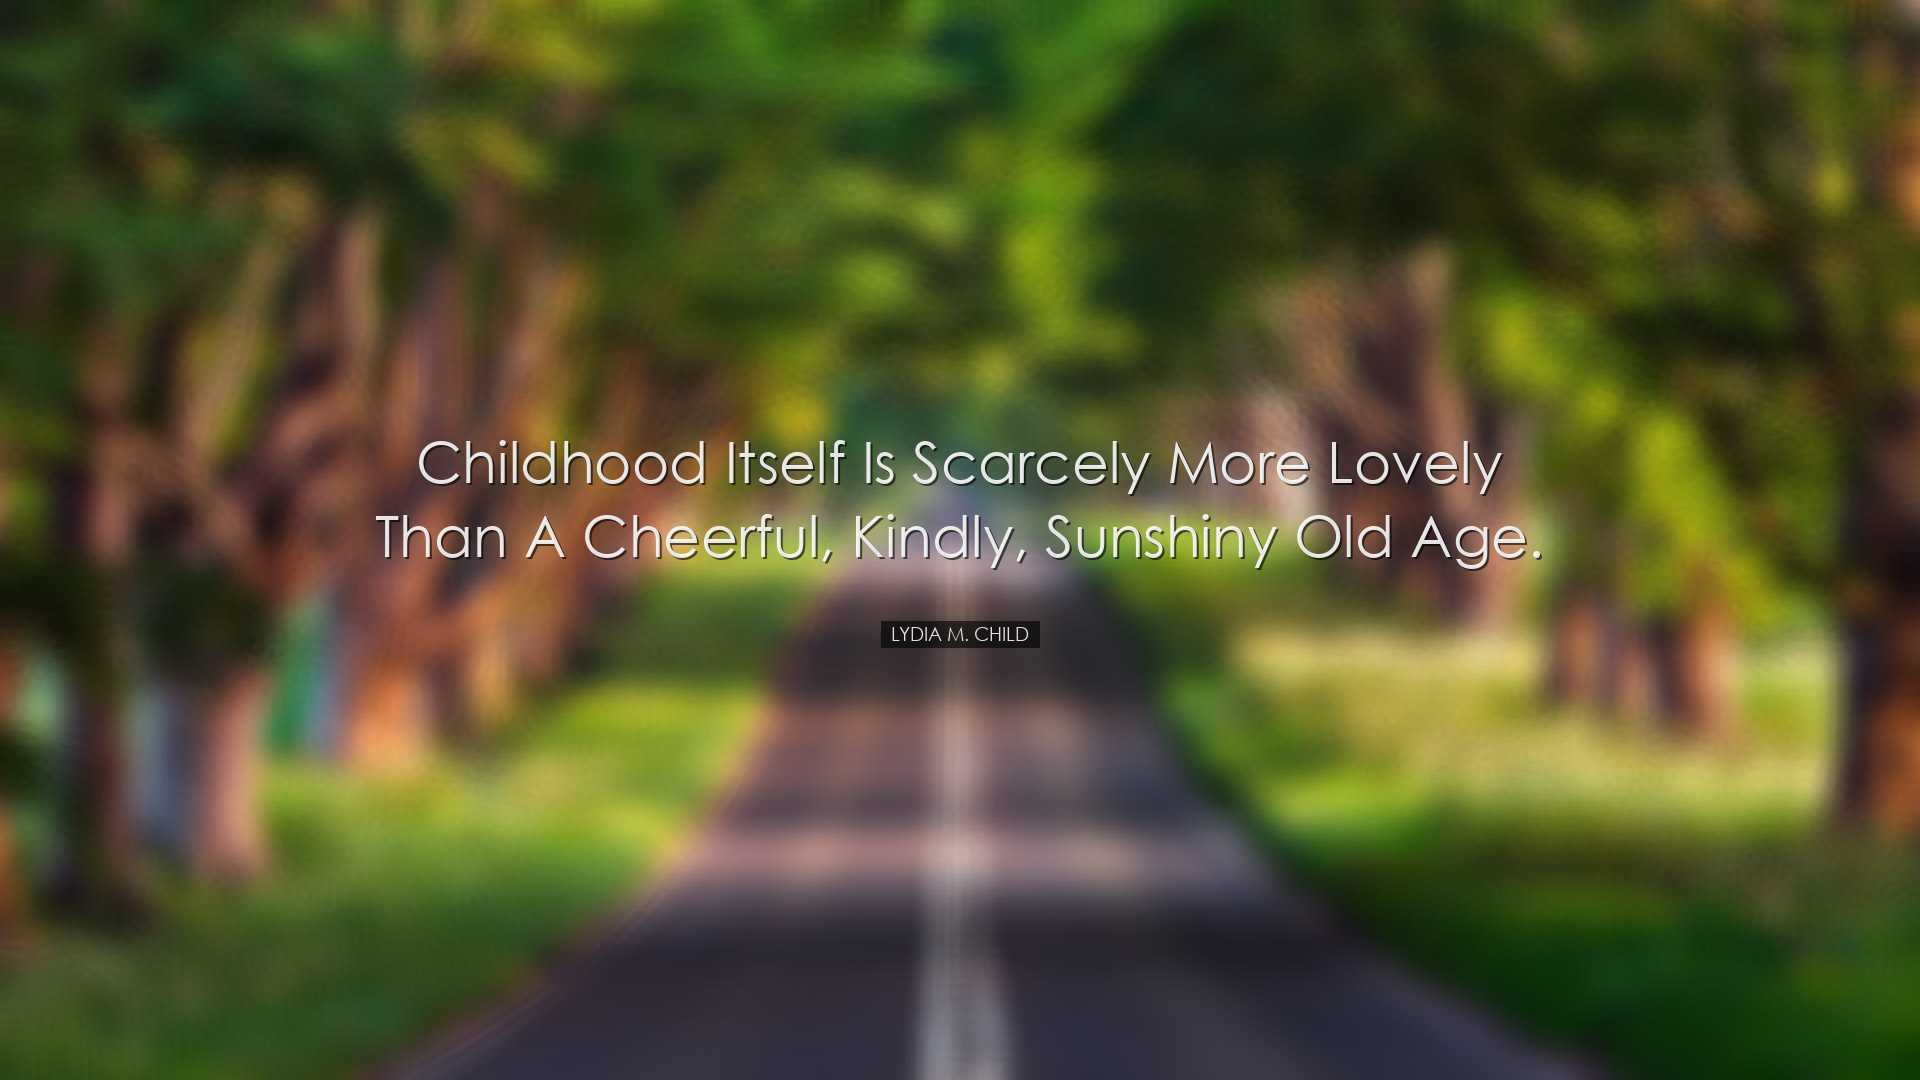 Childhood itself is scarcely more lovely than a cheerful, kindly,